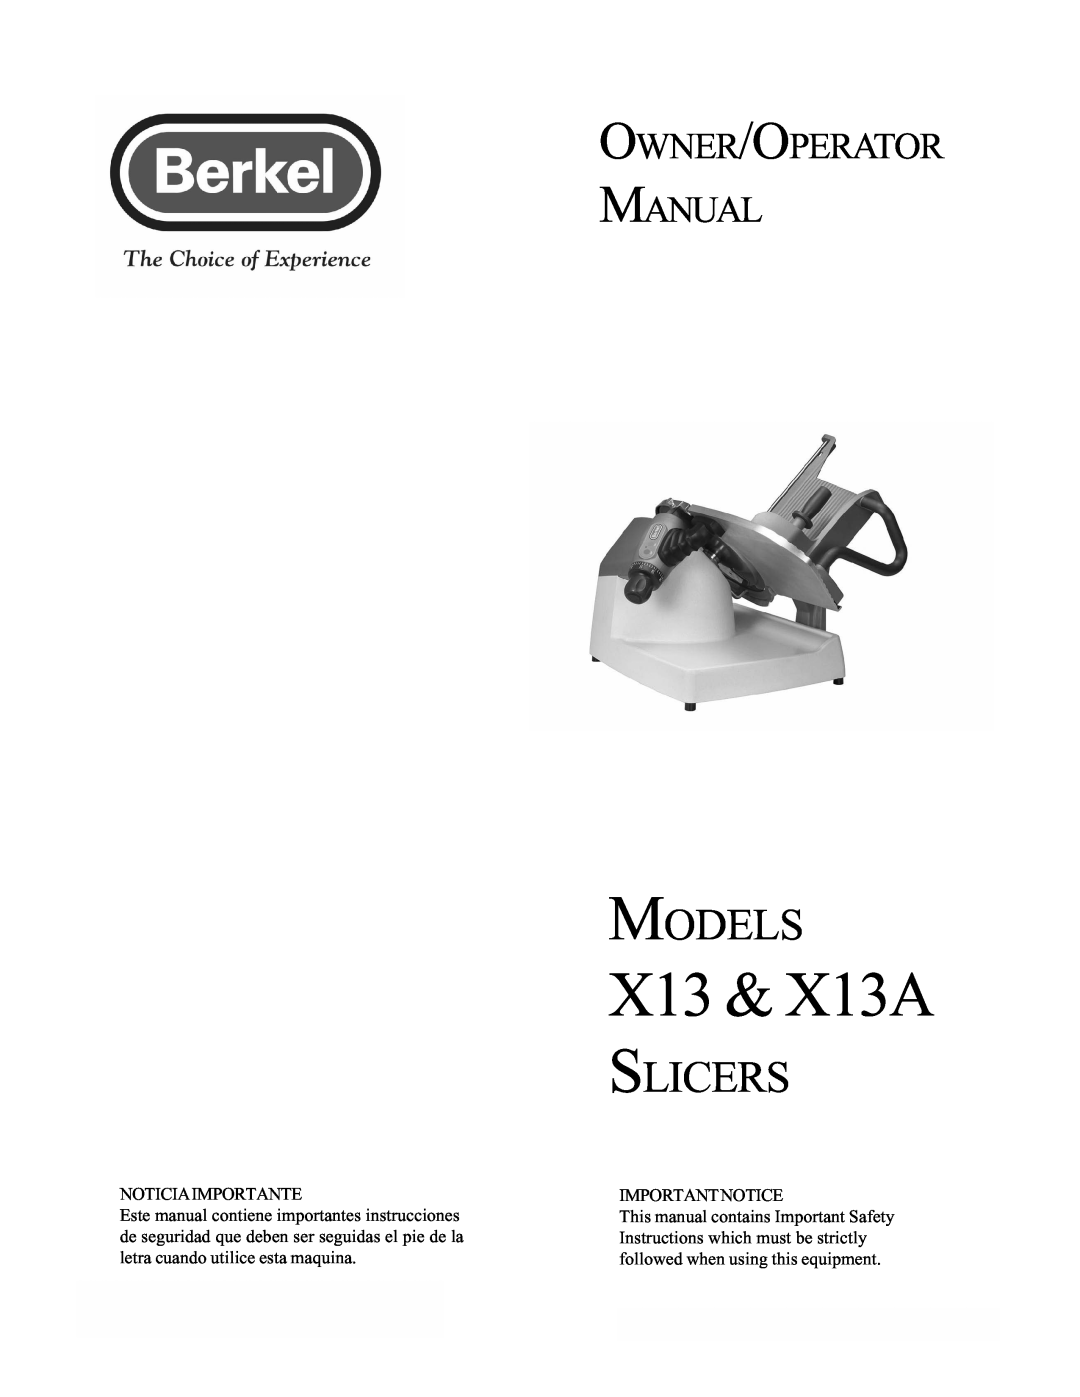 Berkel important safety instructions X13 & X13A, Models, Slicers, Owner/Operator Manual, Noticiaimportante 